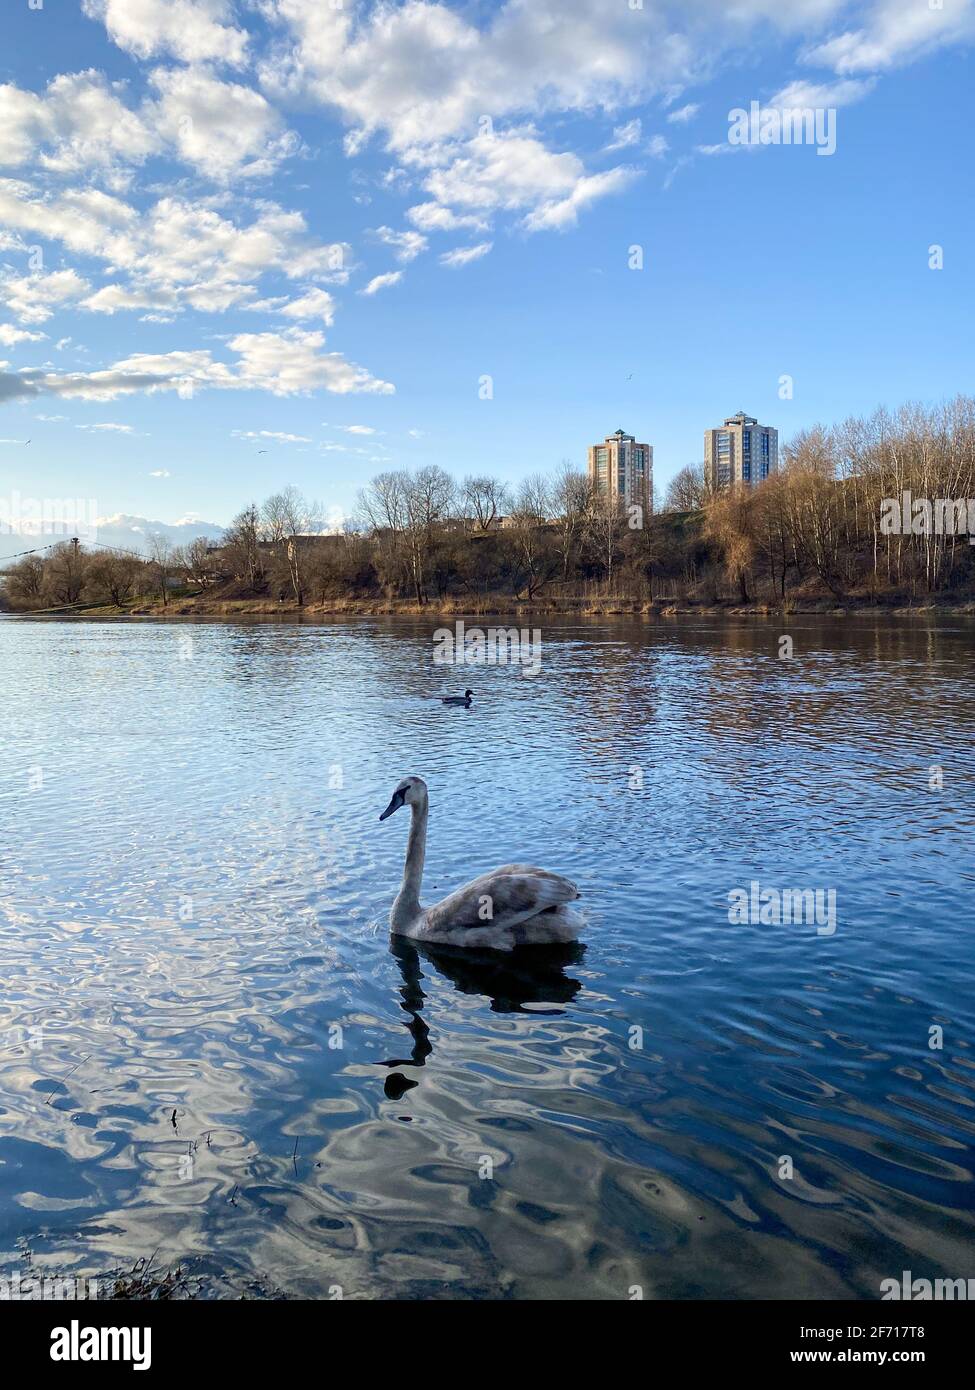 The swan family swims on the river Stock Photo